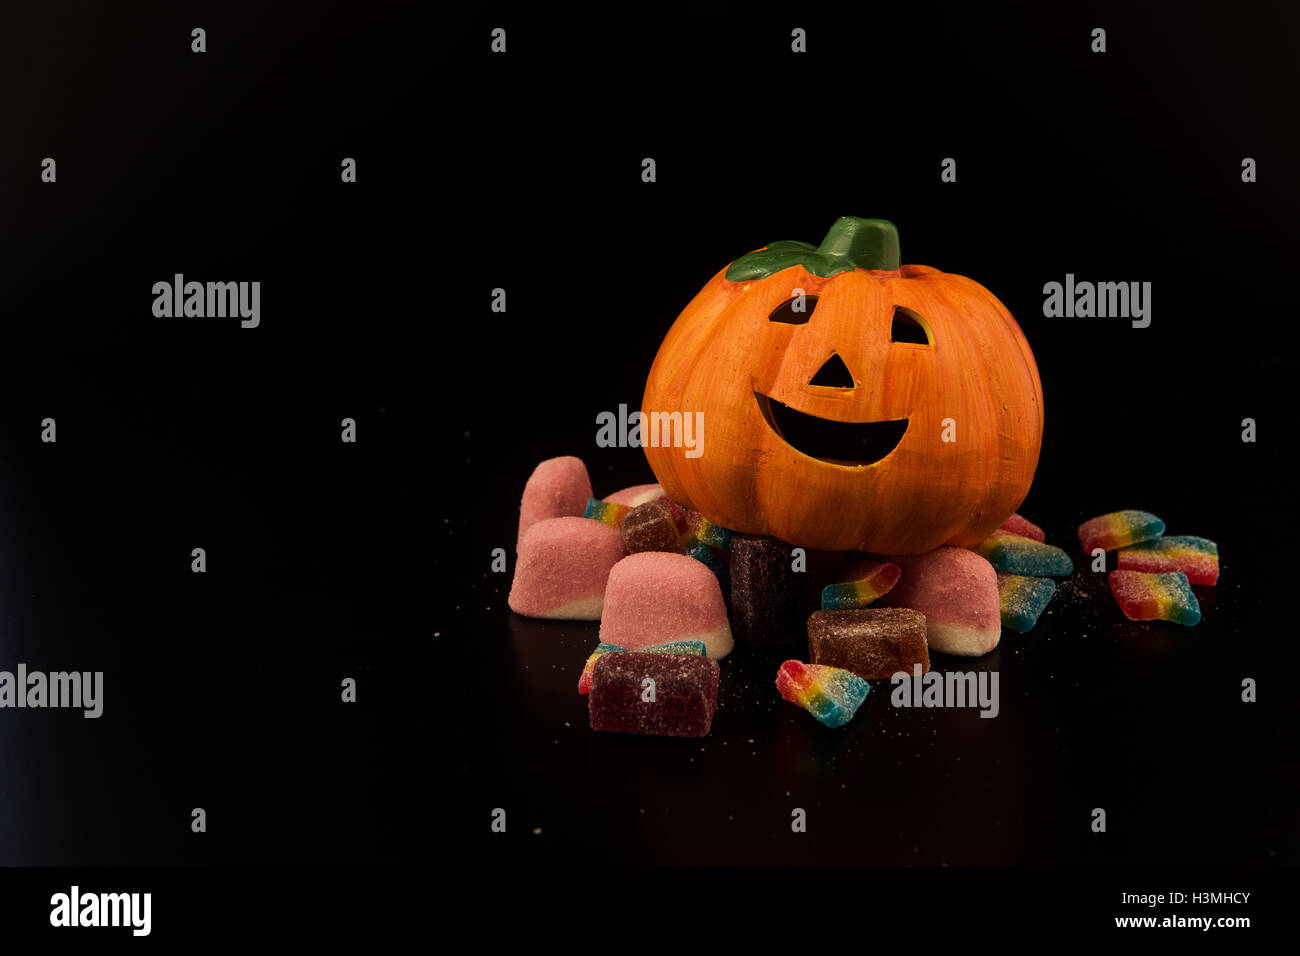 Halloween pumpkin with candlelight and boke background Stock Photo